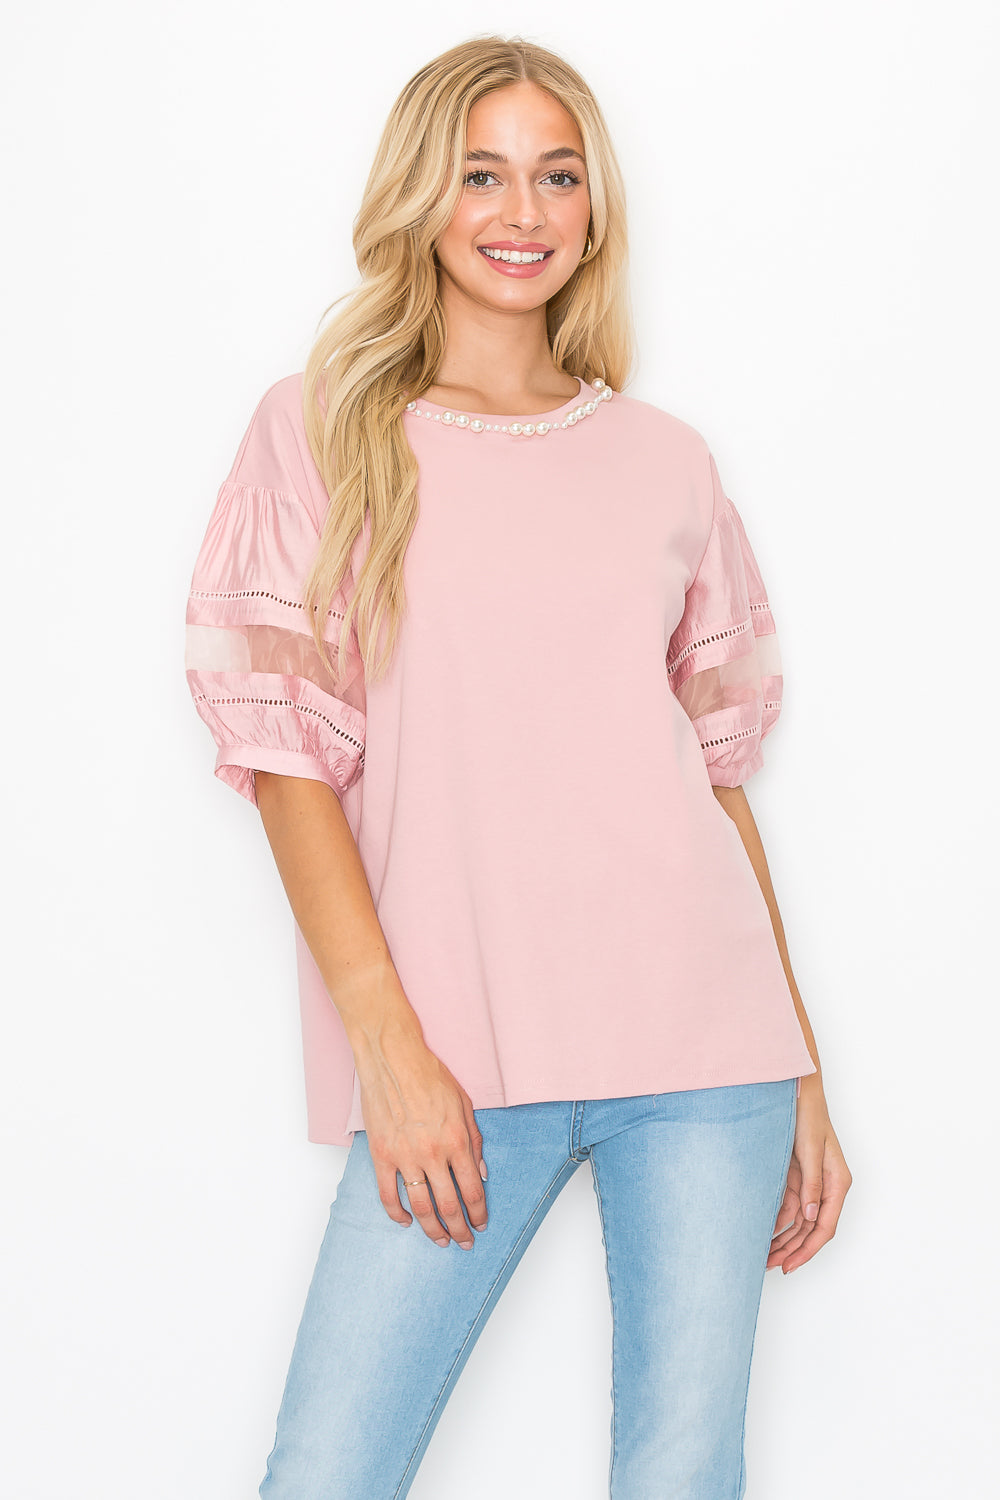 Reesa Pointe Knit Top with Pearls